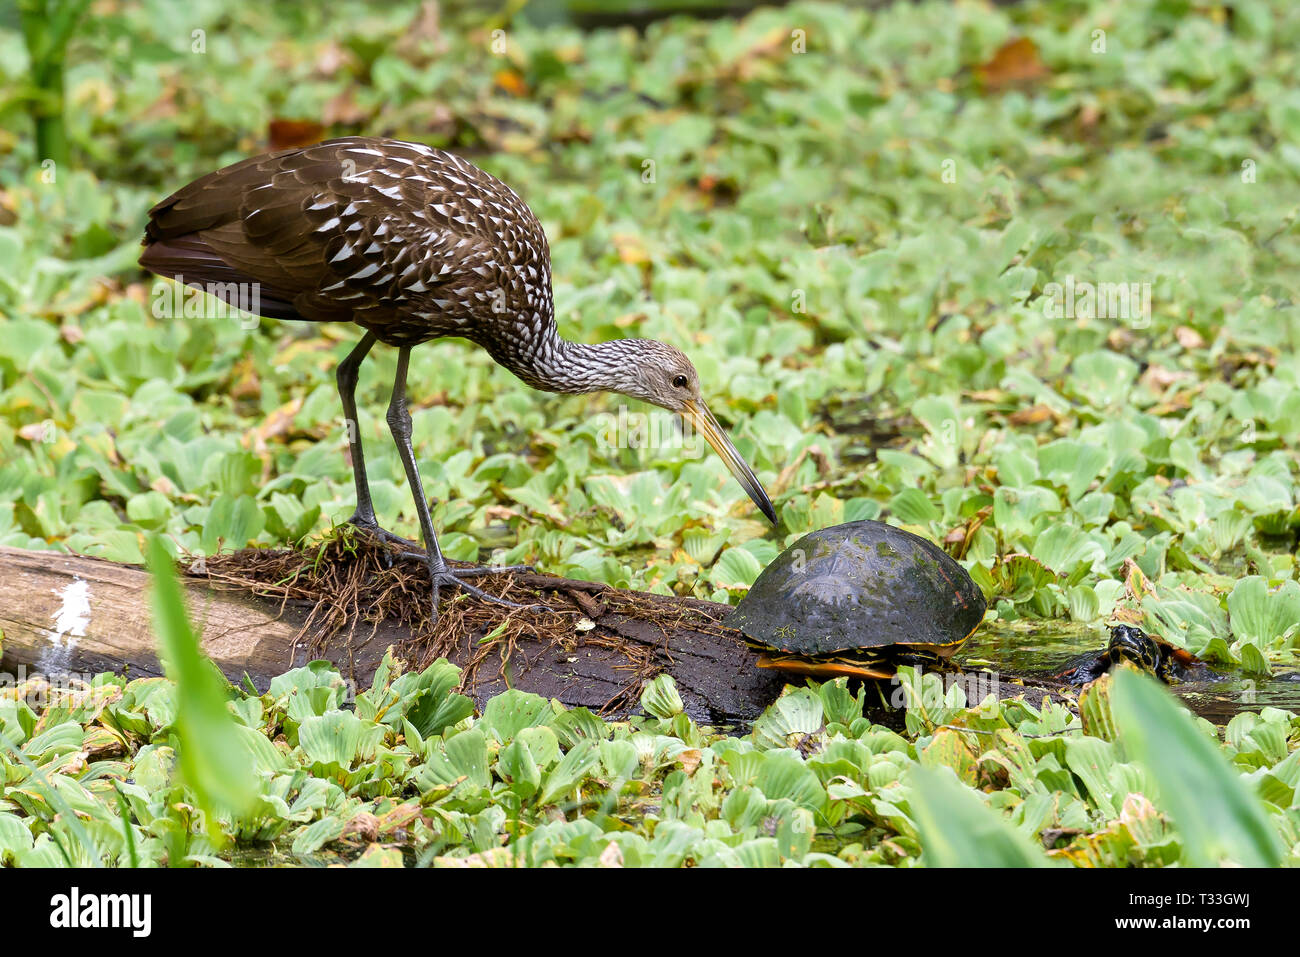 A limpkin (Aramus guarauna) and a Florida red-bellied cooter (Pseudemys nelsoni) on a log surrounded by water cabbage in Corkscrew Swamp Sanctuary, Fl Stock Photo